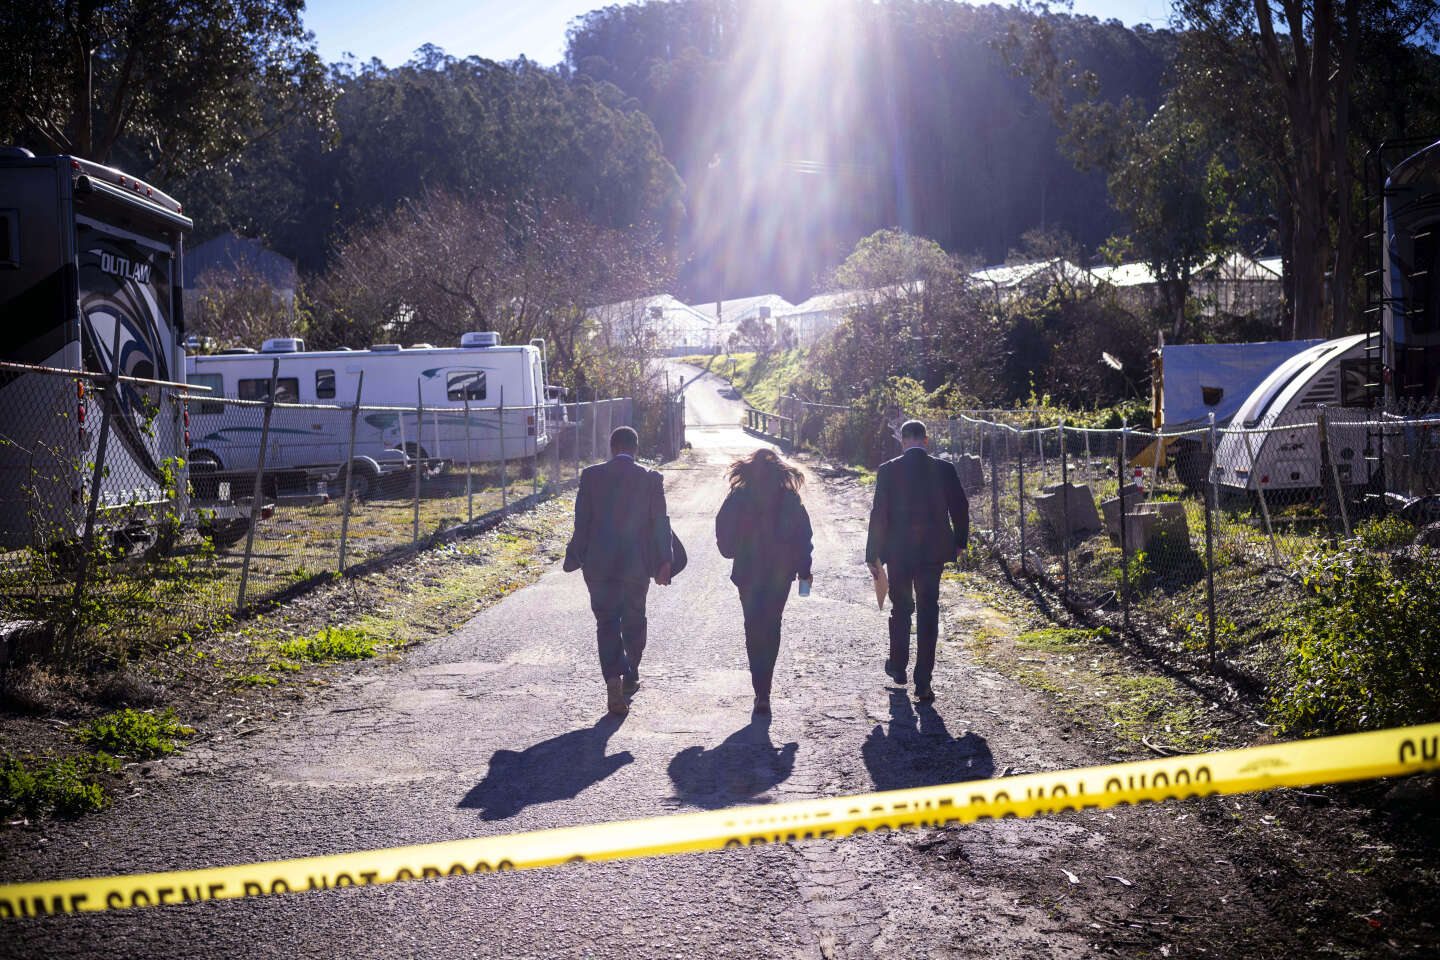 Half Moon Bay: behind the shooting, the misery of farm workers